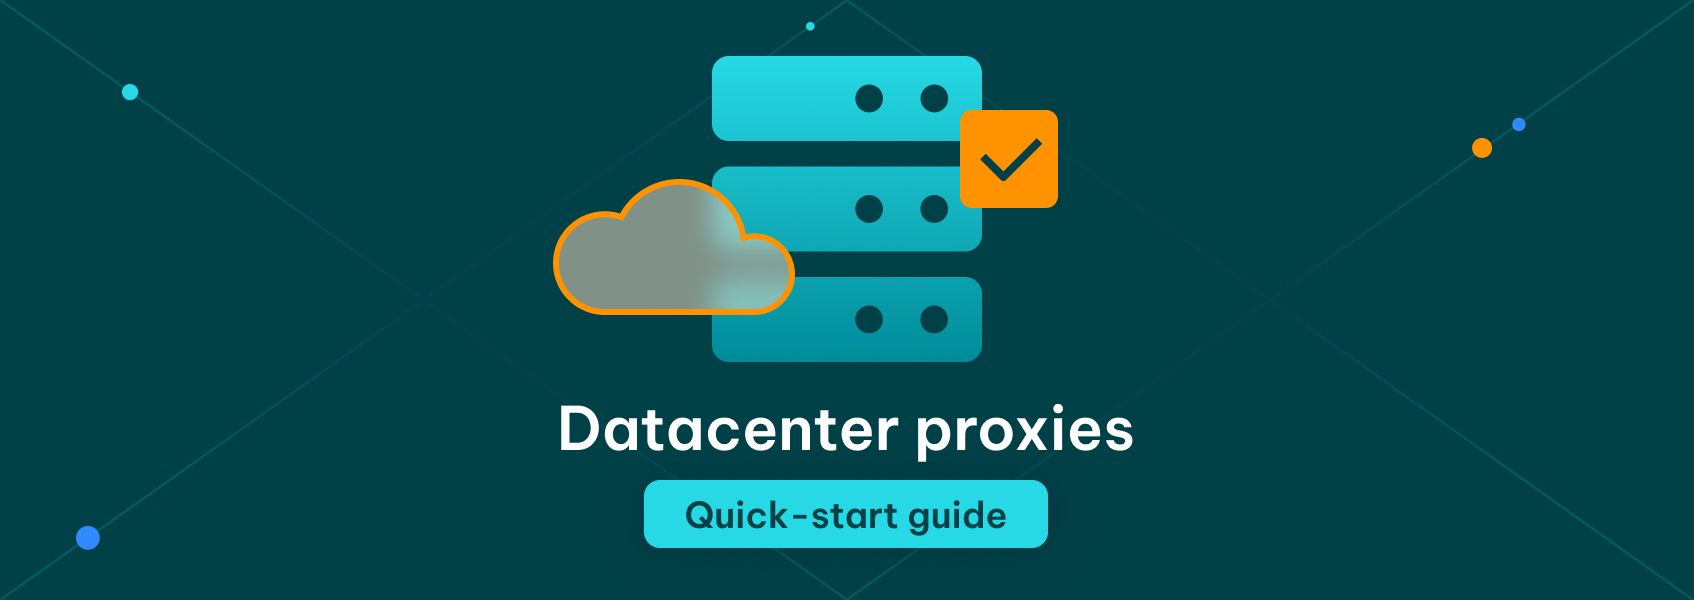 Datacenter Proxies Quick-Start Guide